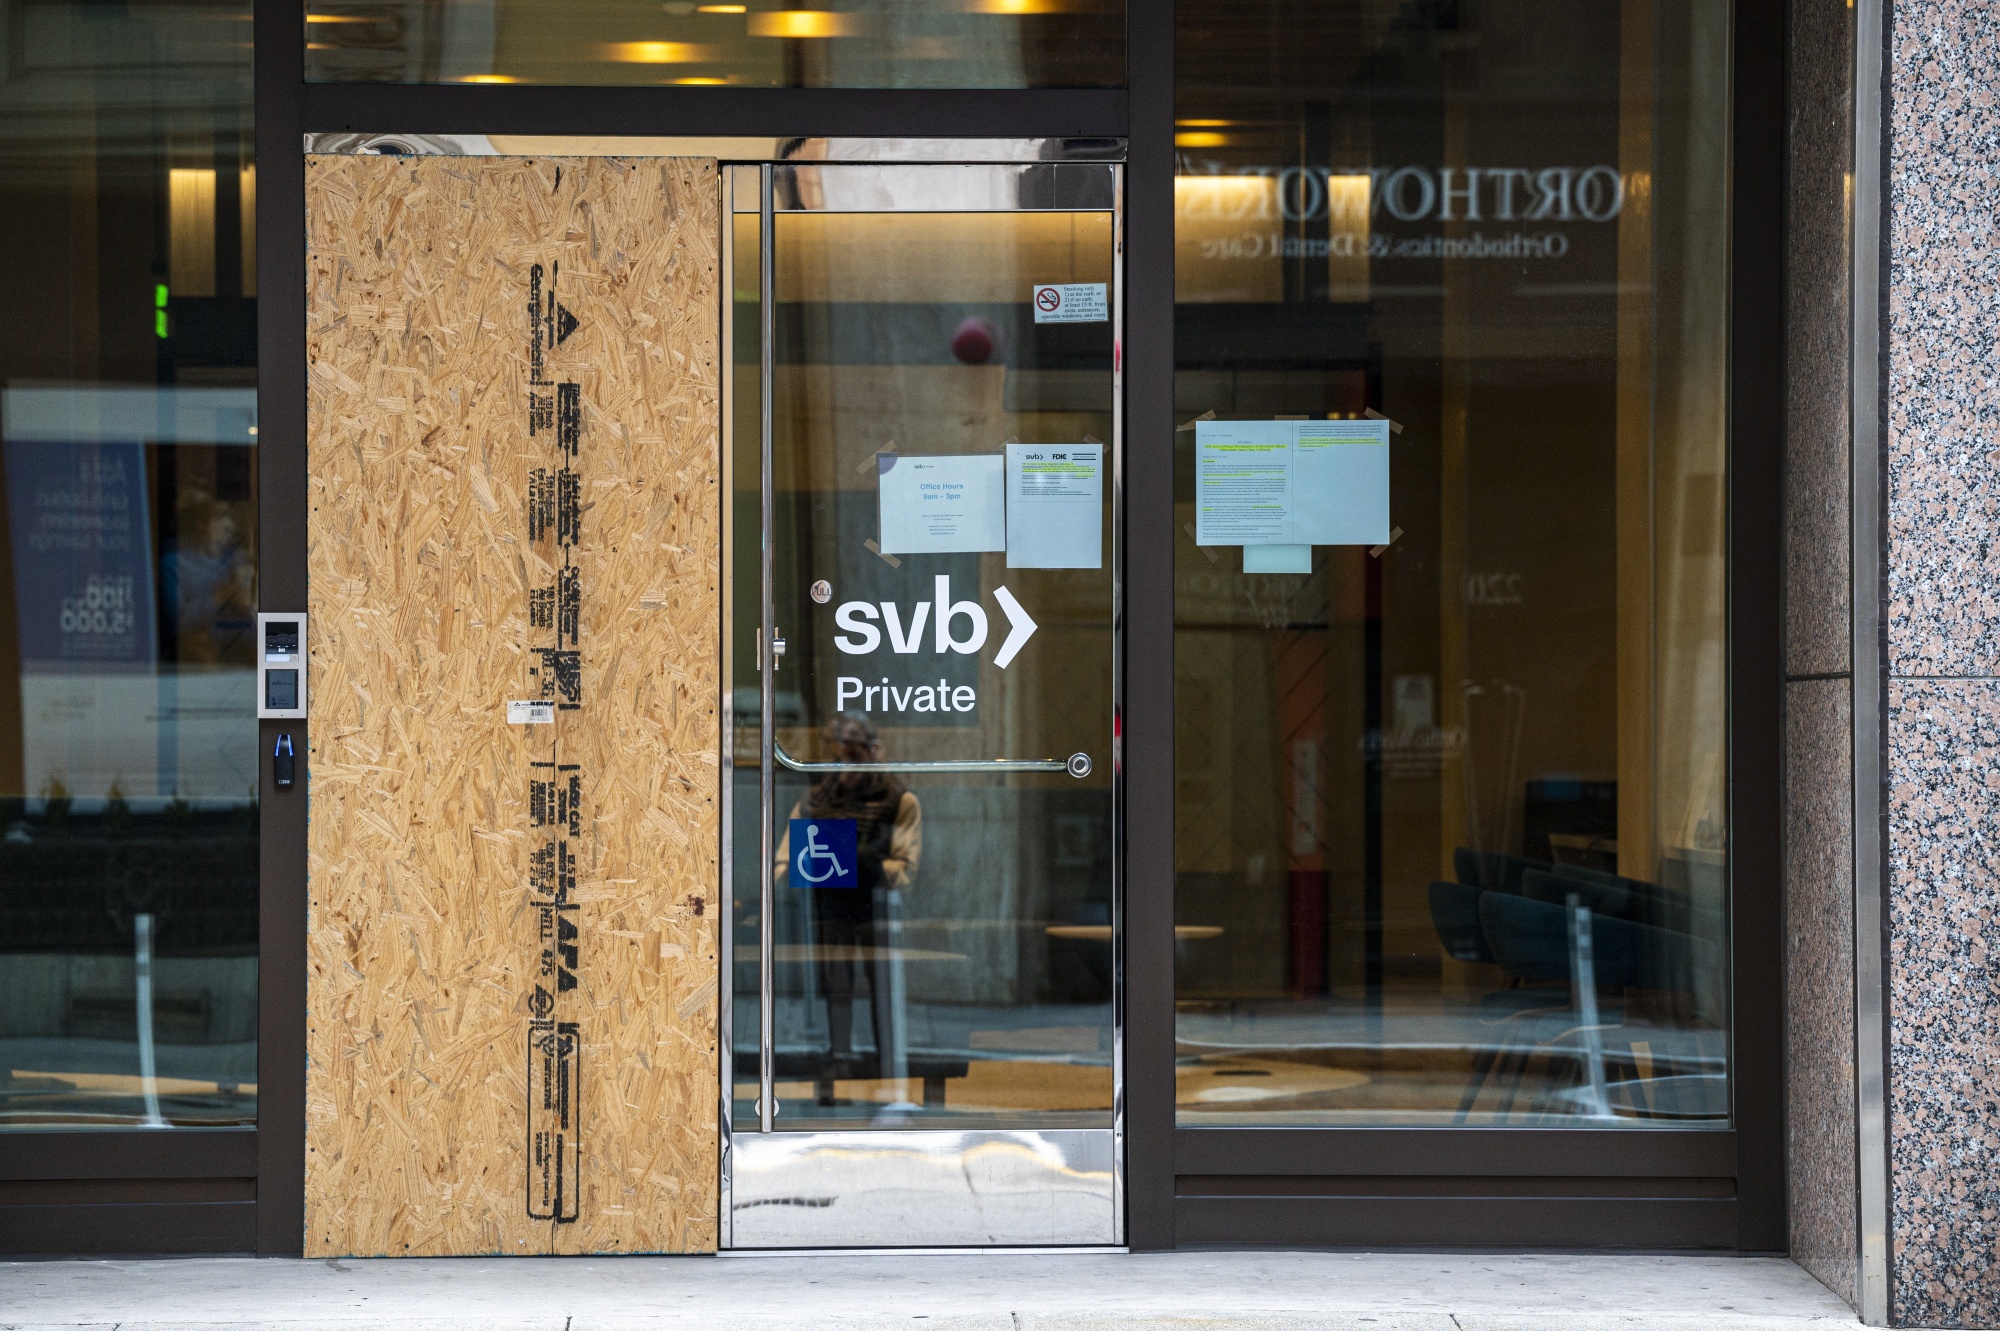 Are these companies really too big to fail? Lessons from the SVB